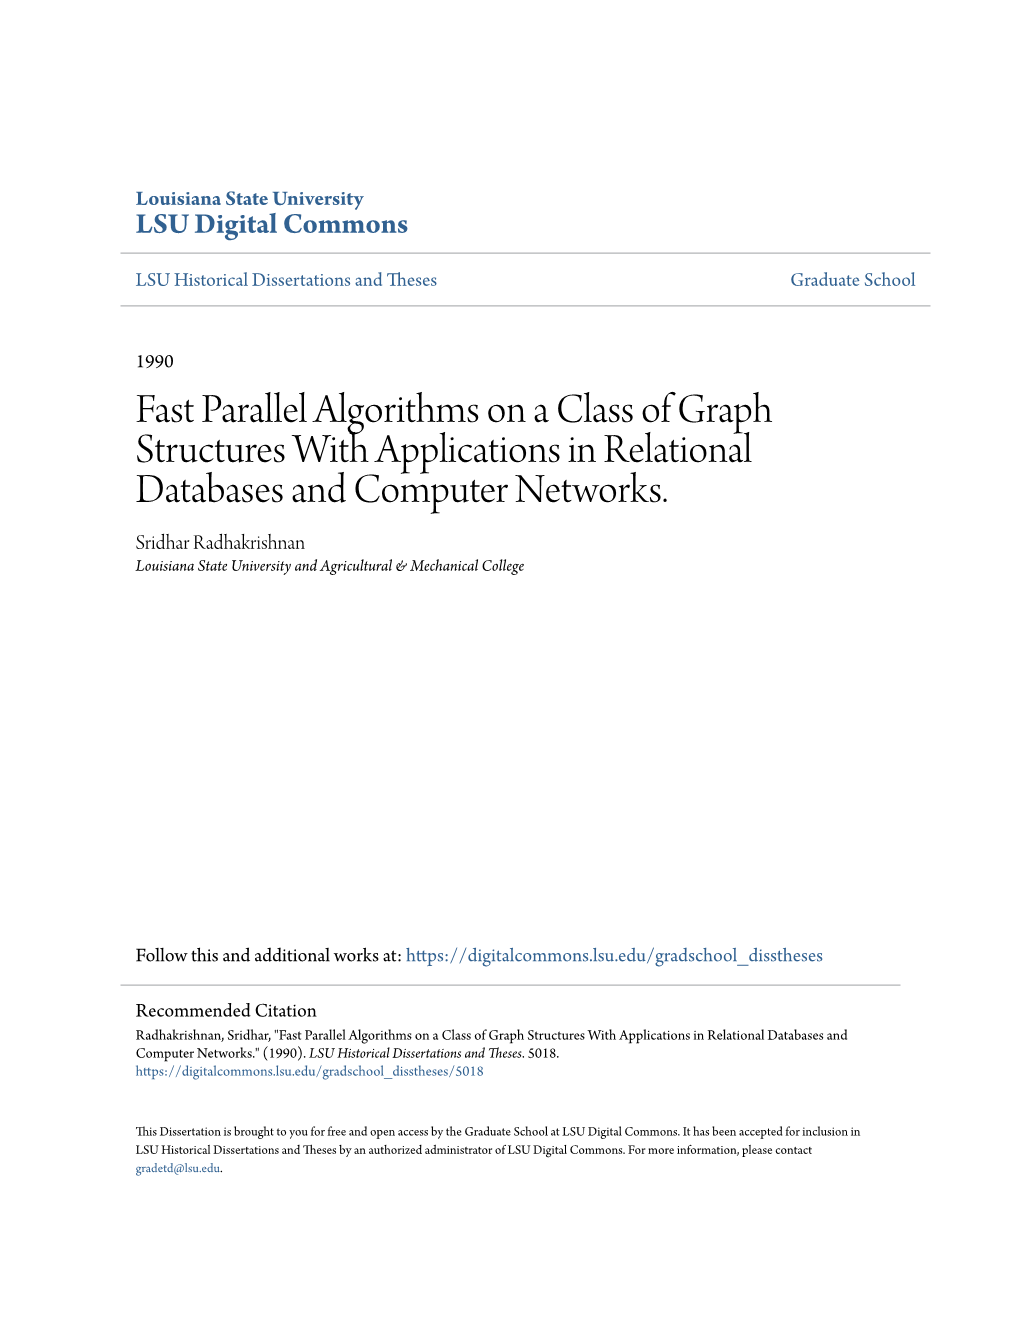 Fast Parallel Algorithms on a Class of Graph Structures with Applications in Relational Databases and Computer Networks